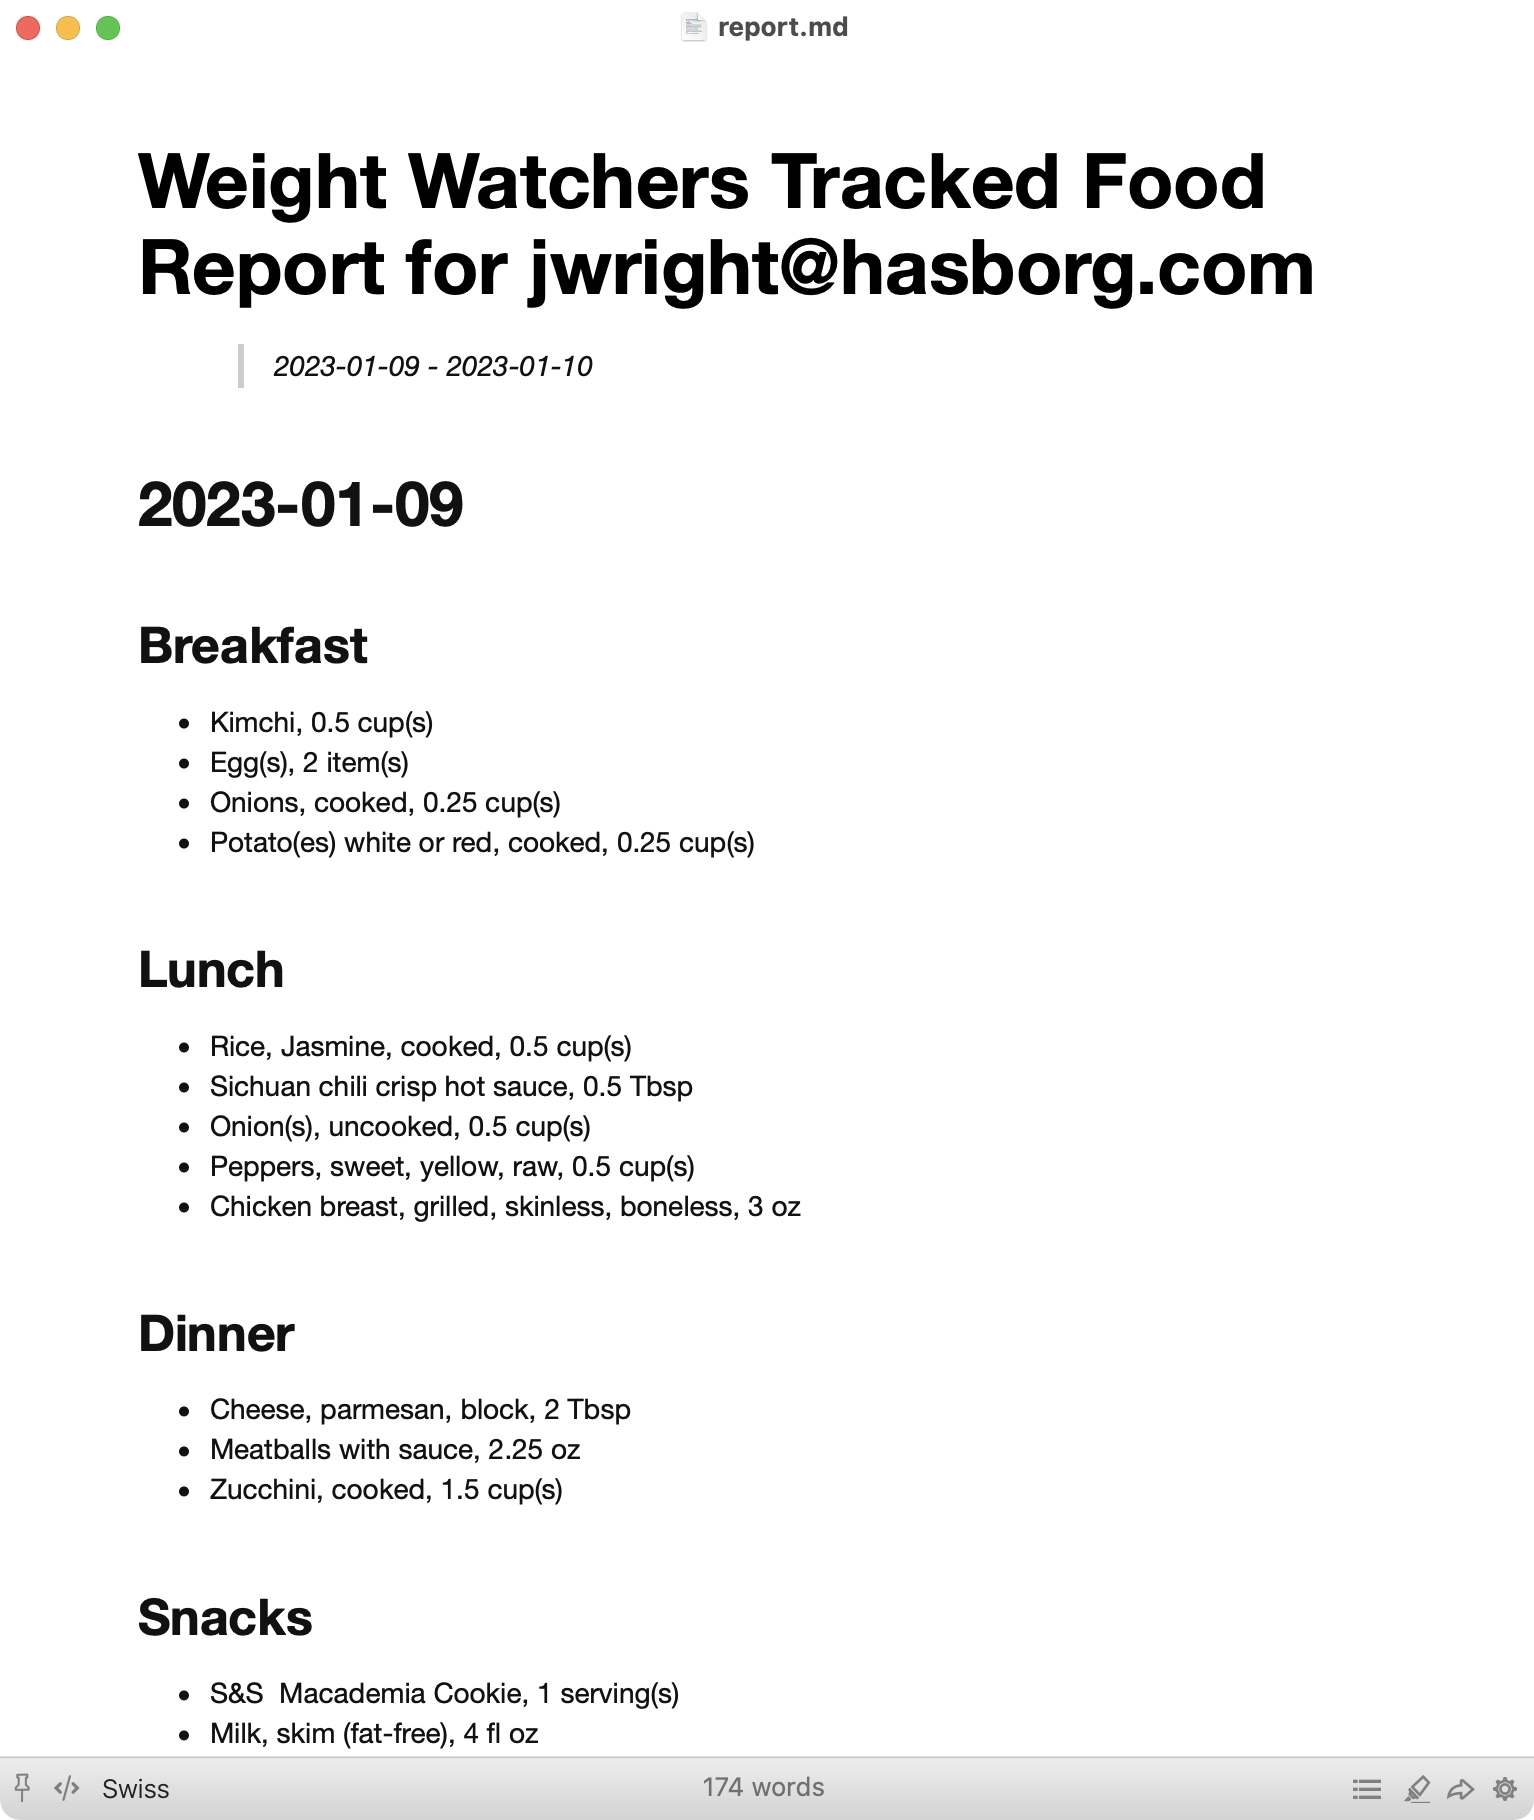 Report screenshot showing output including breakfast, lunch, dinner, and snacks